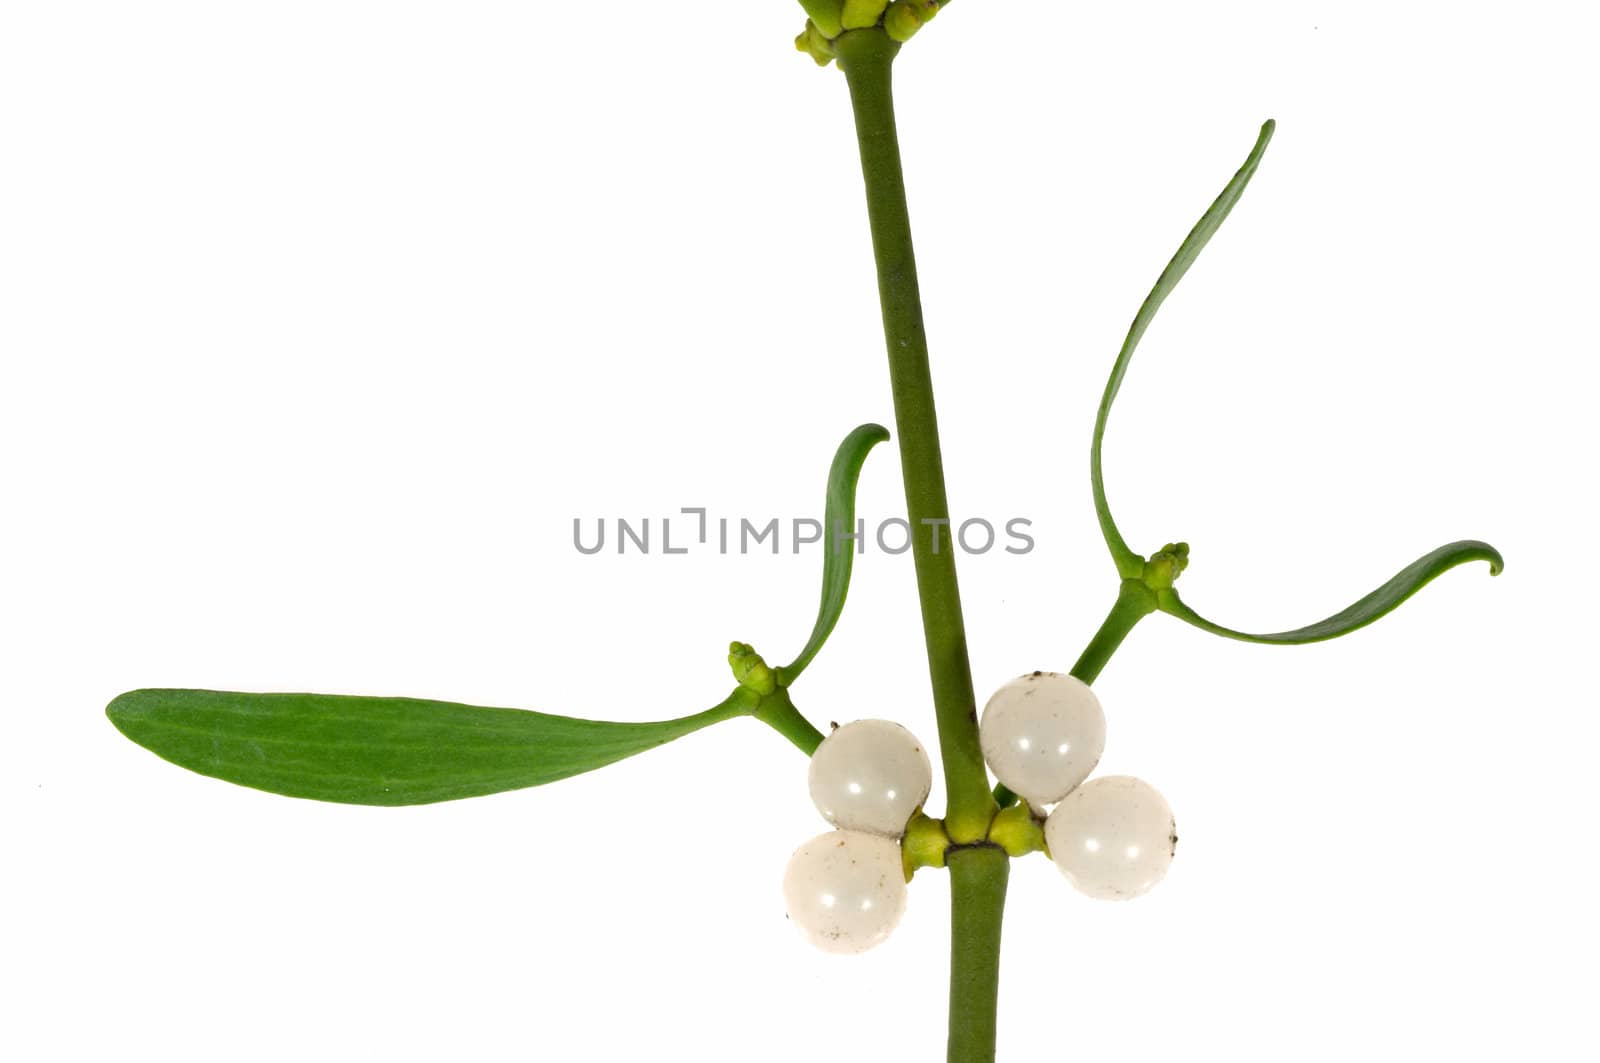 Macro of a mistletoe twig with leafs and berries, isolated on  white background.